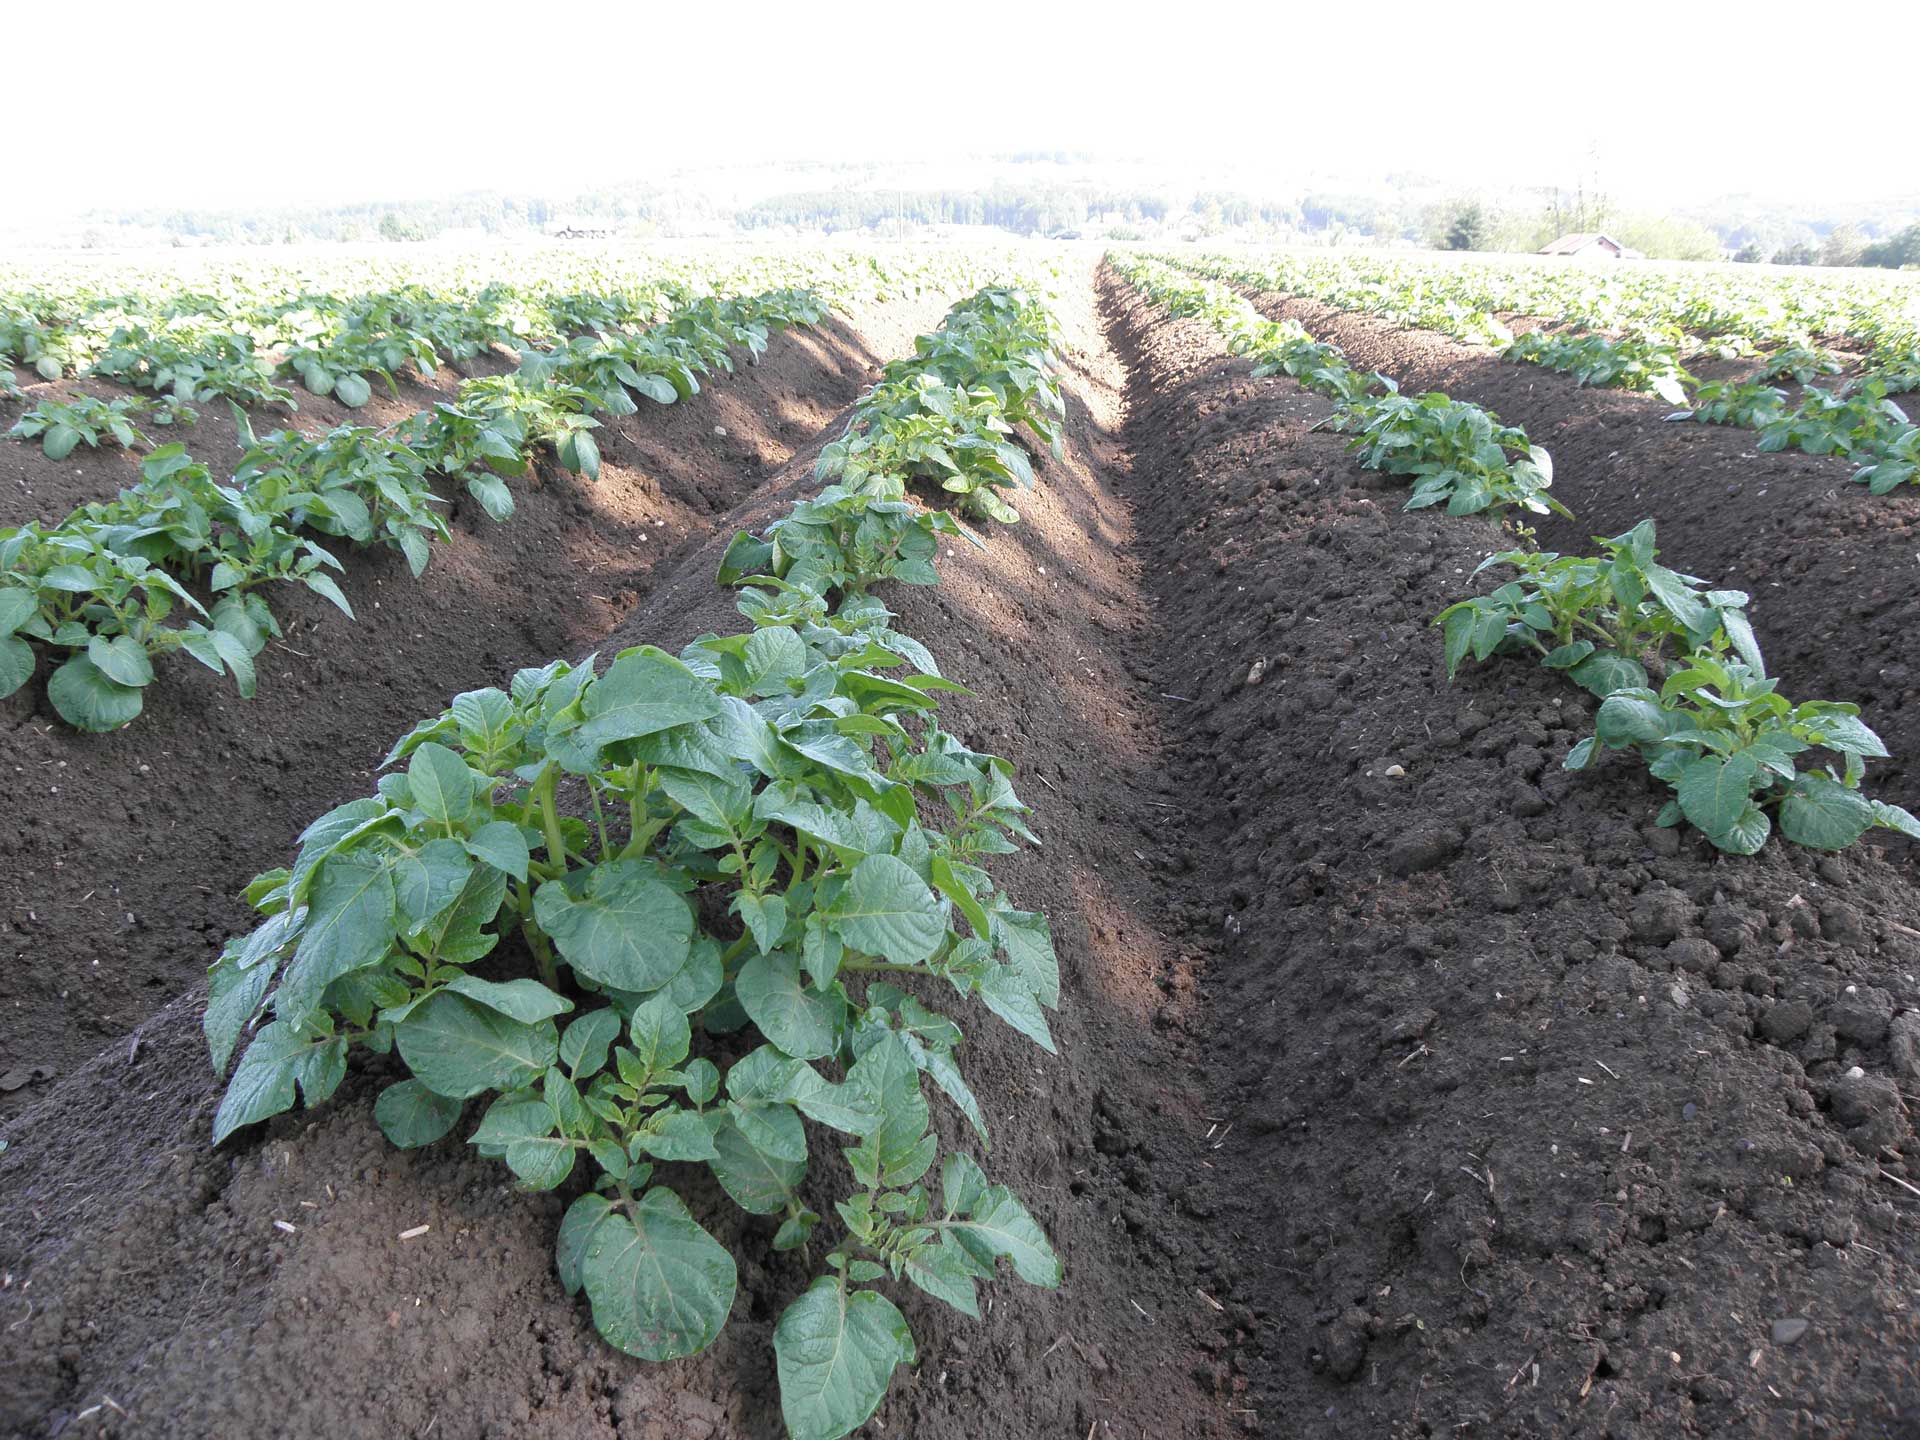 This agronomic image shows young poatoes